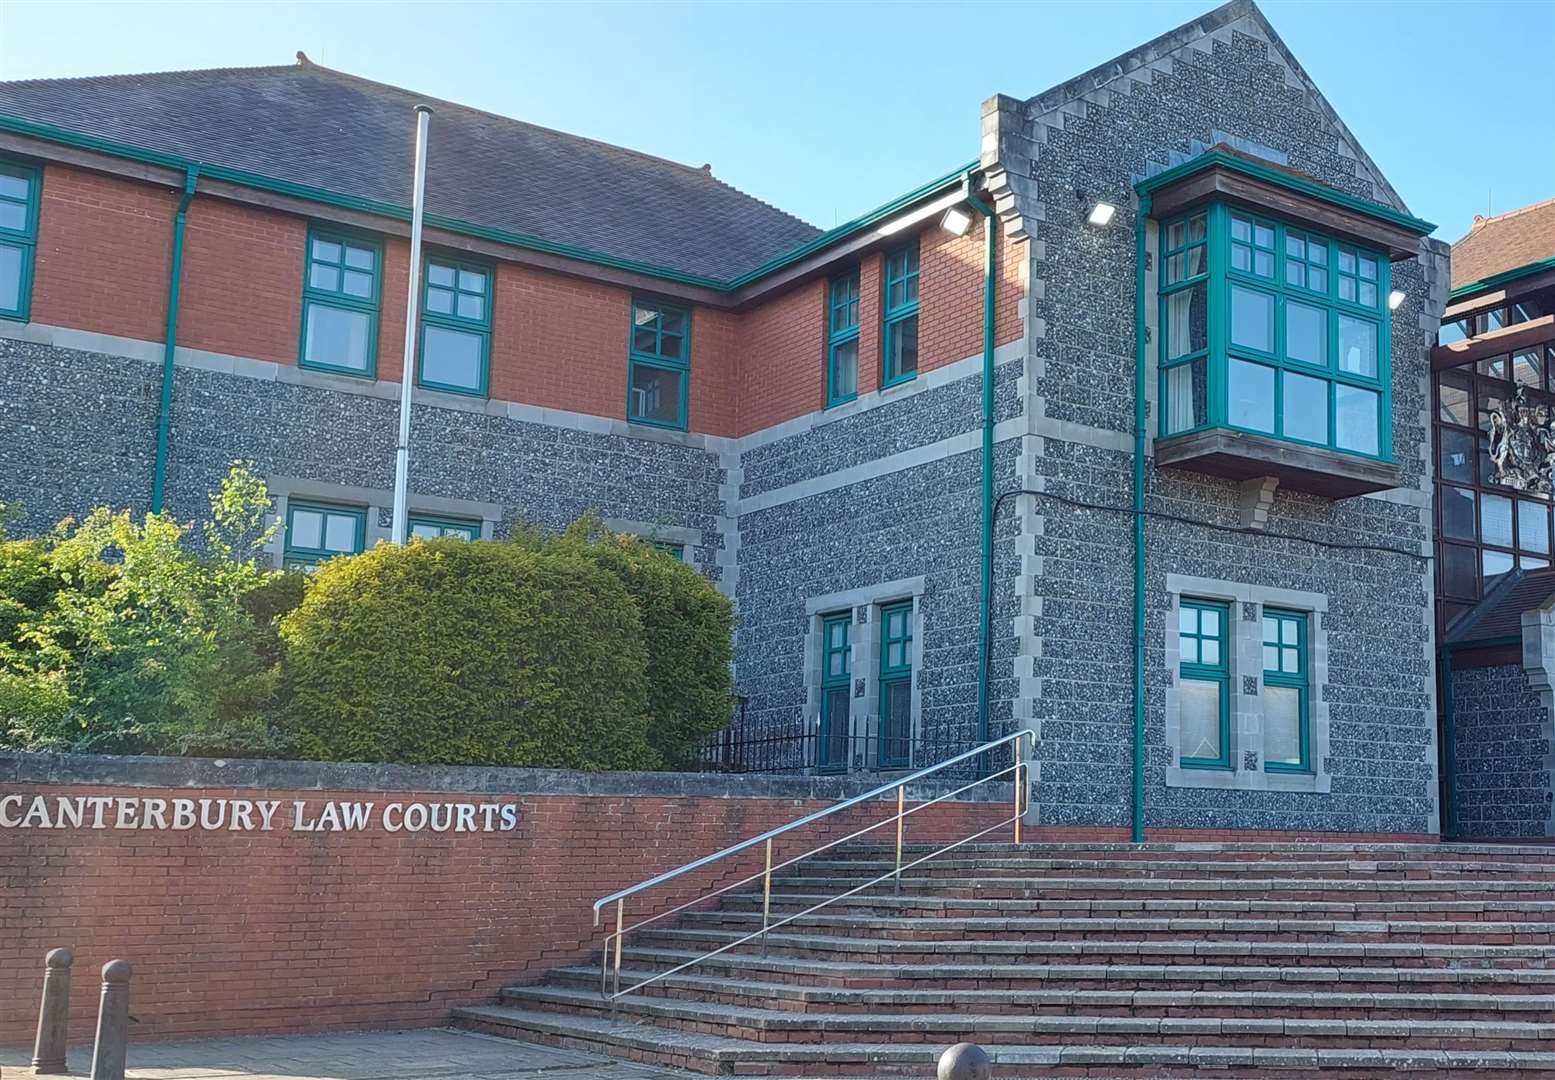 James Nangle was convicted by a jury at Canterbury Crown Court